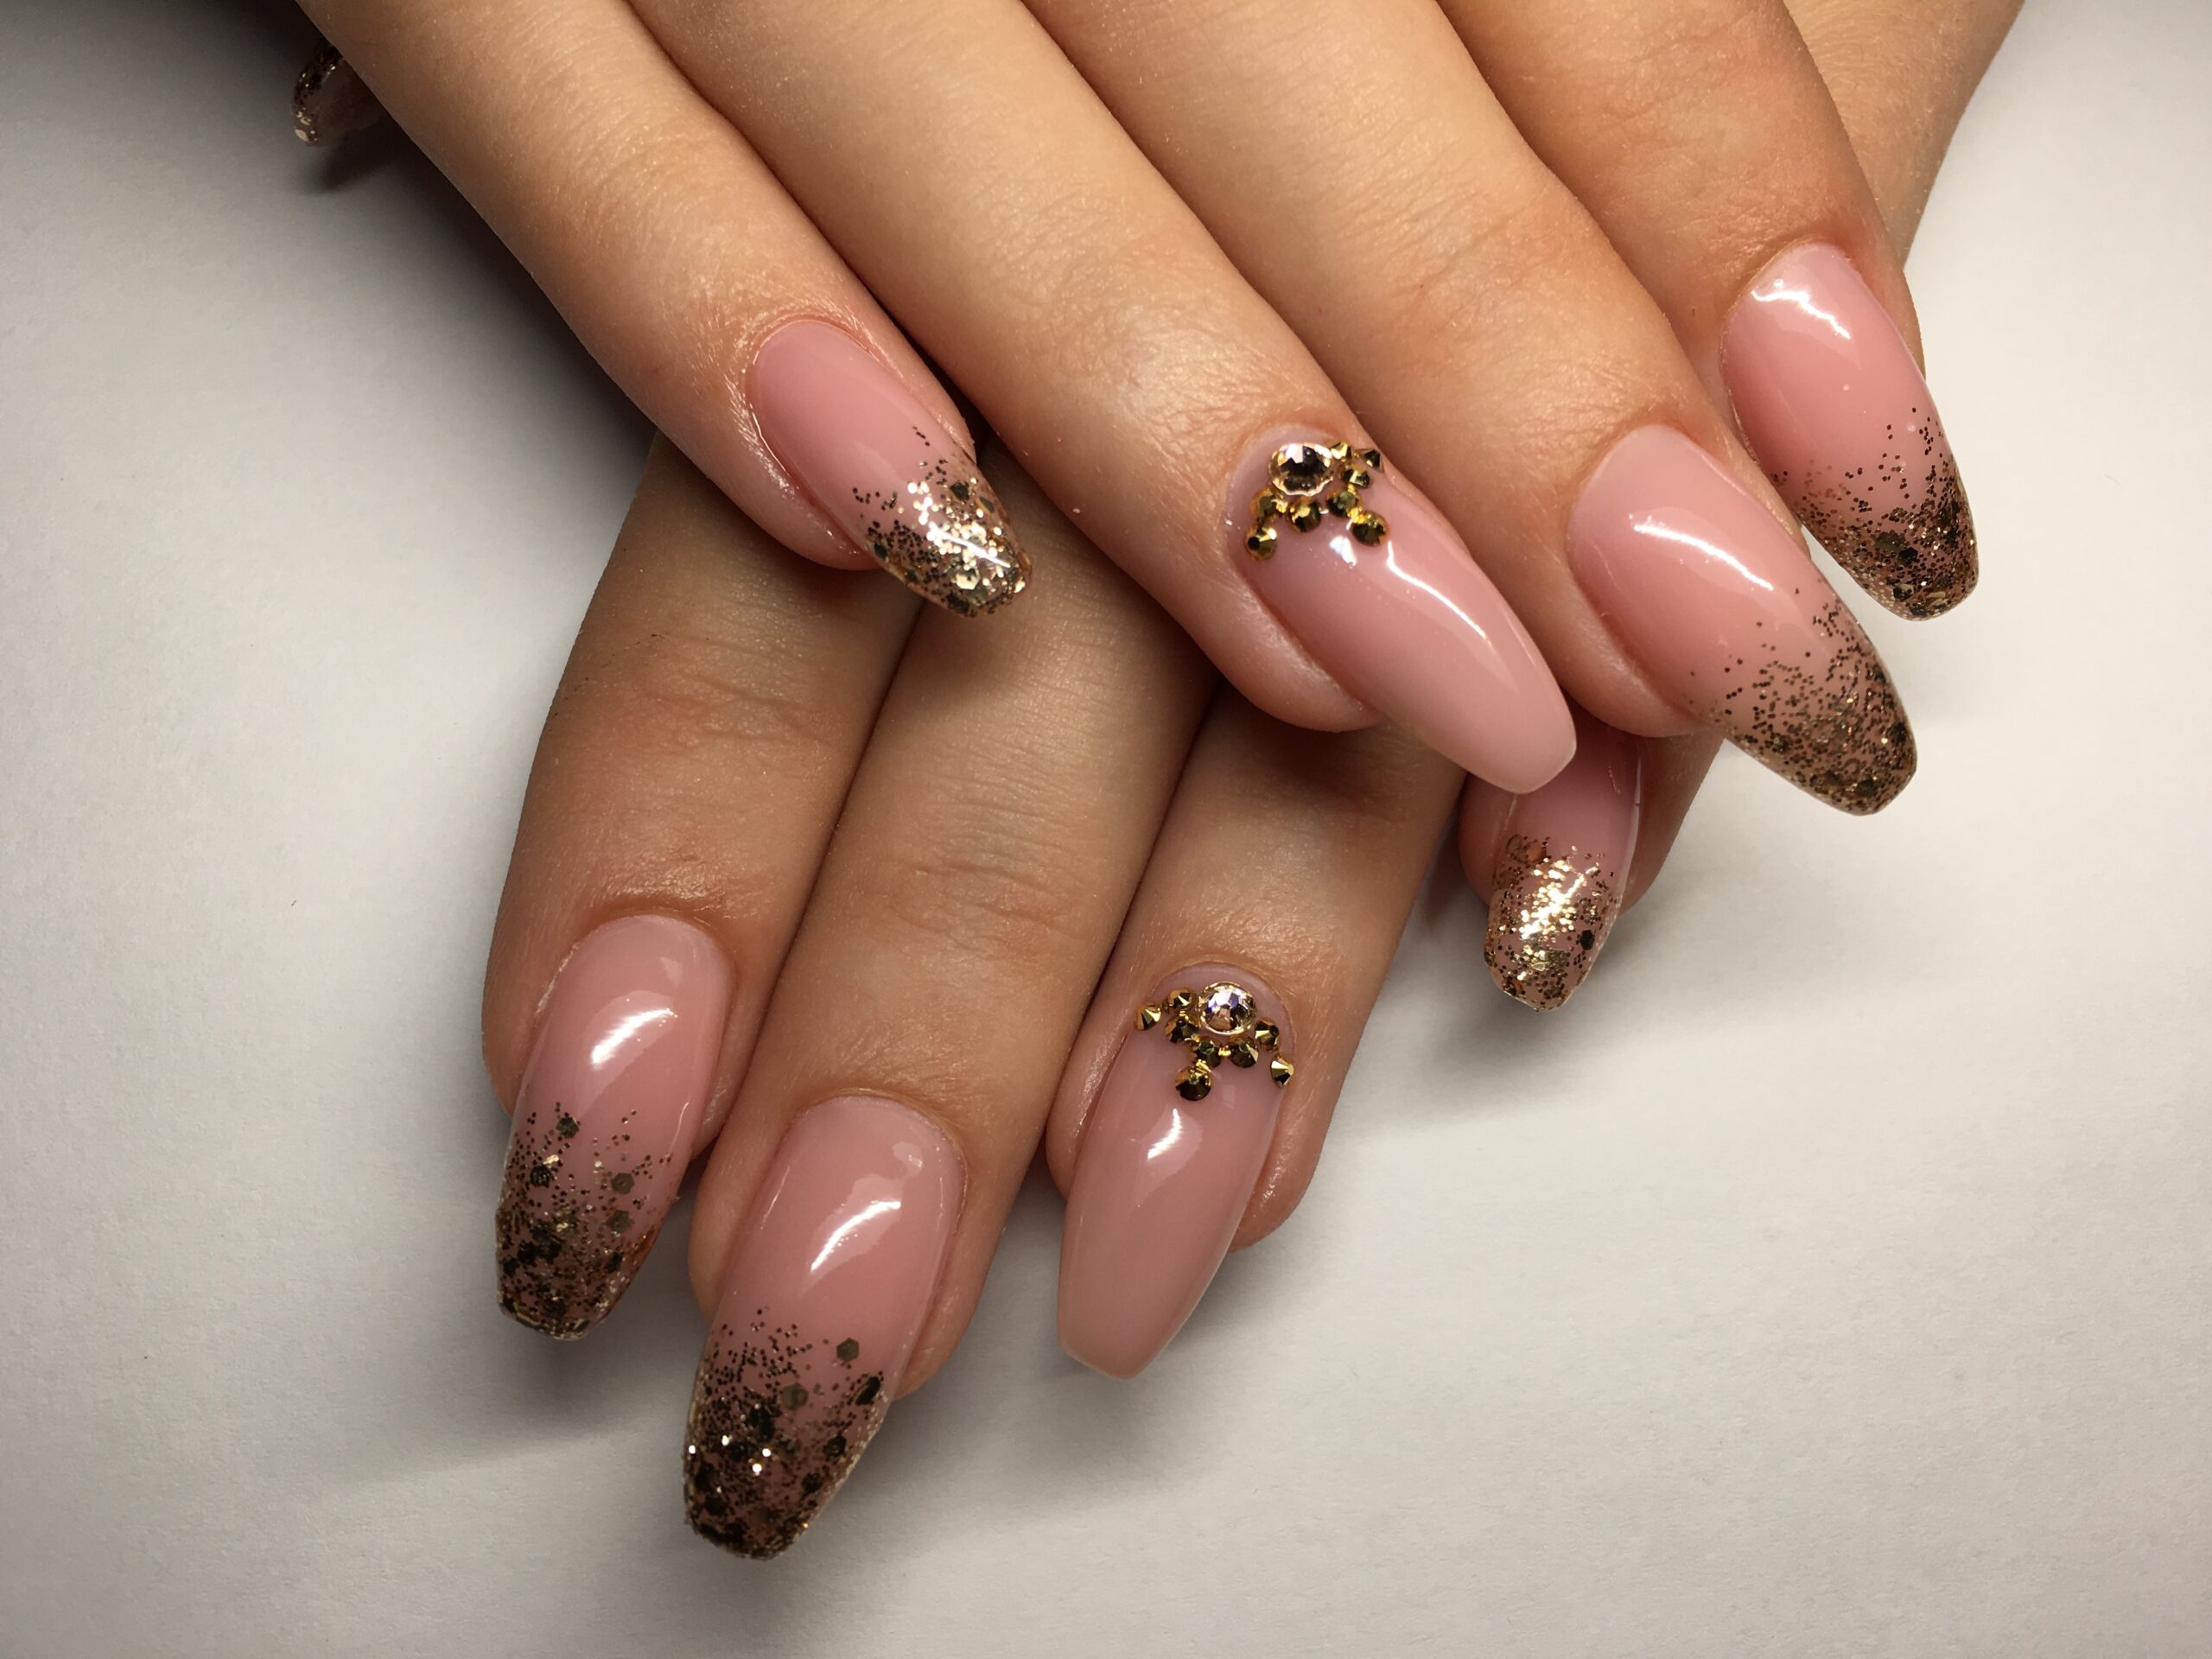 Nail art with gold details